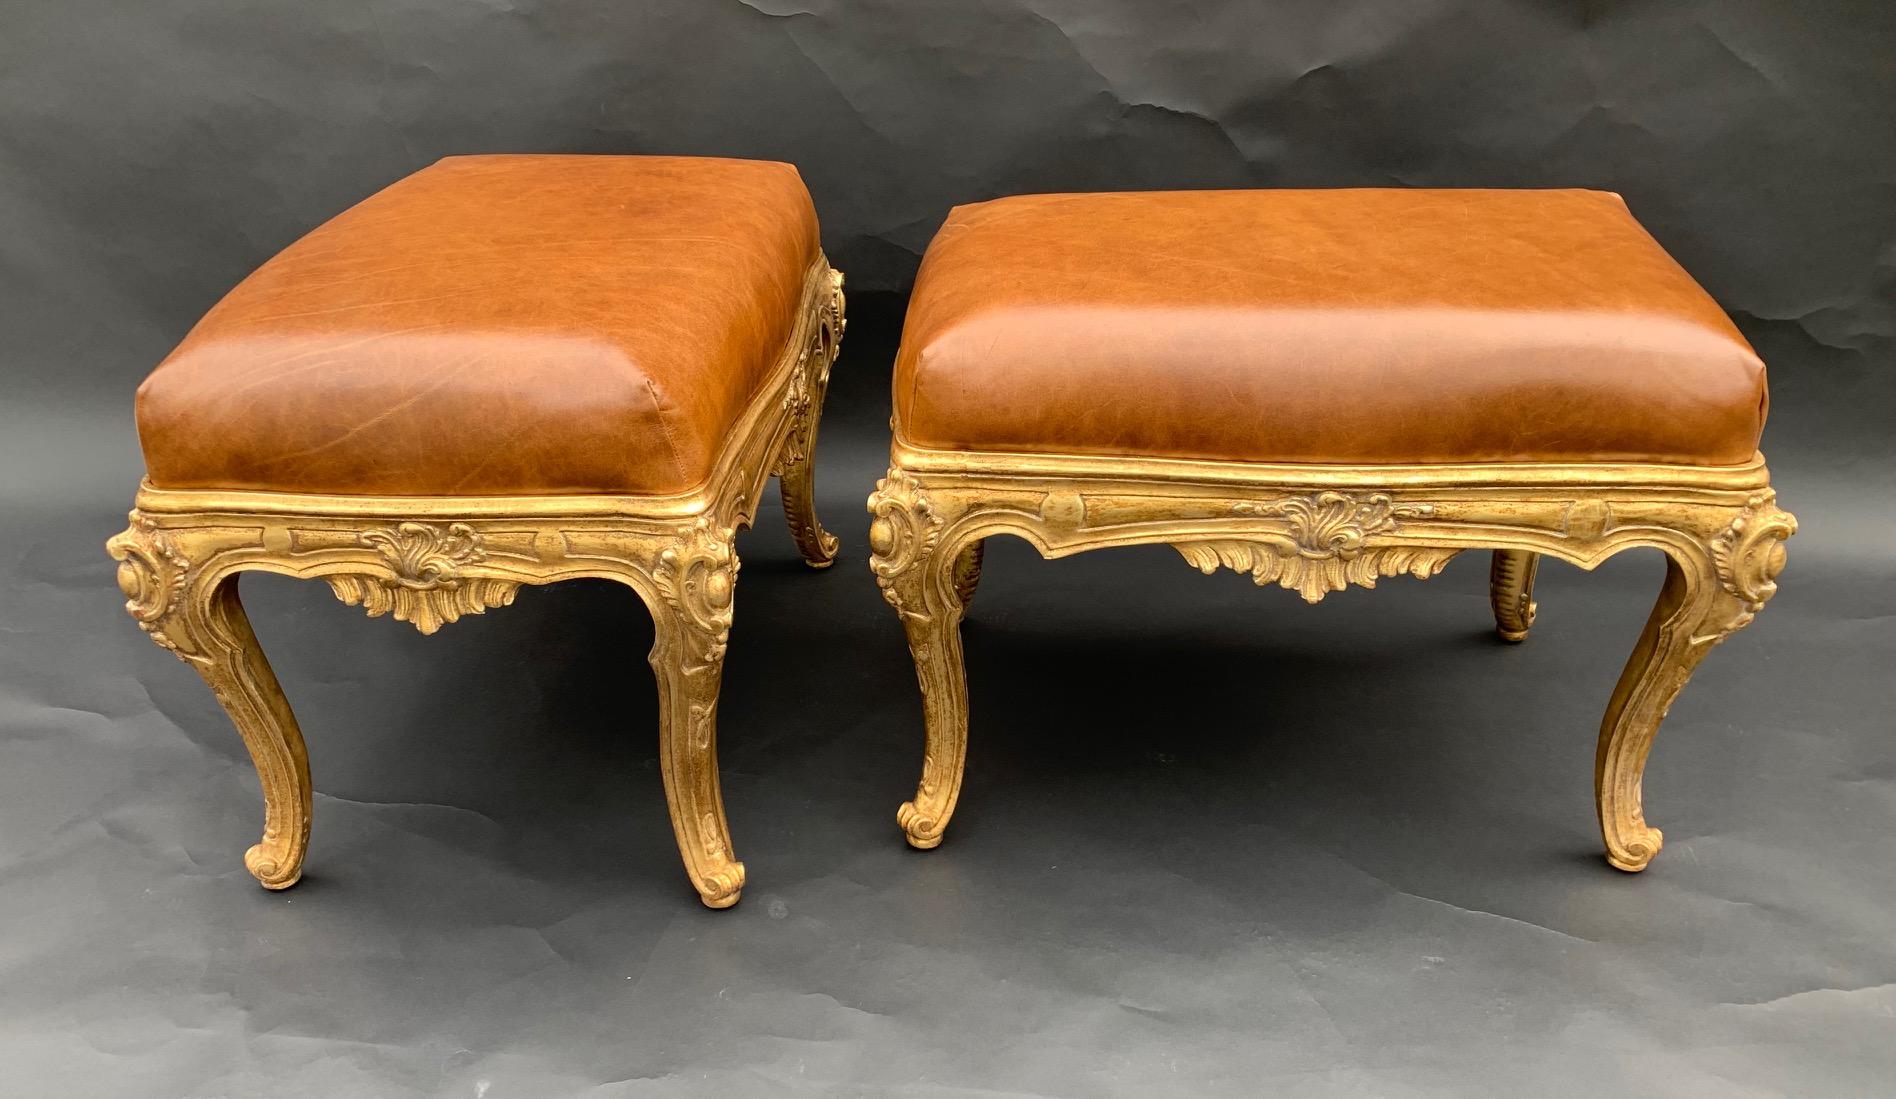 Pair of gild hand carved benches, upholstered in brown leather, Italy, 20th century.